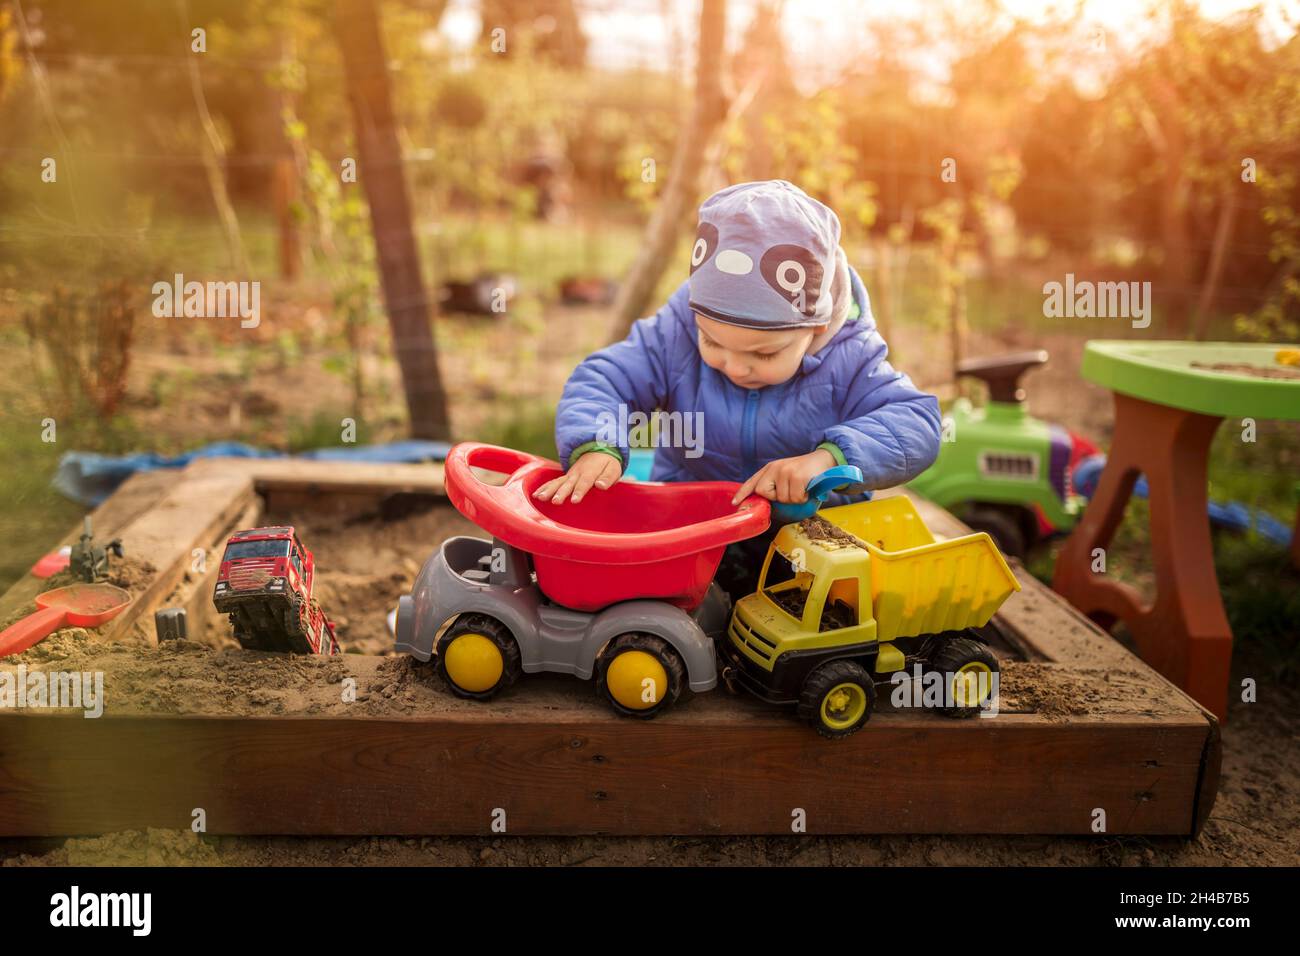 Small boy playing with toys in sandpit wearing blue clothes Stock Photo